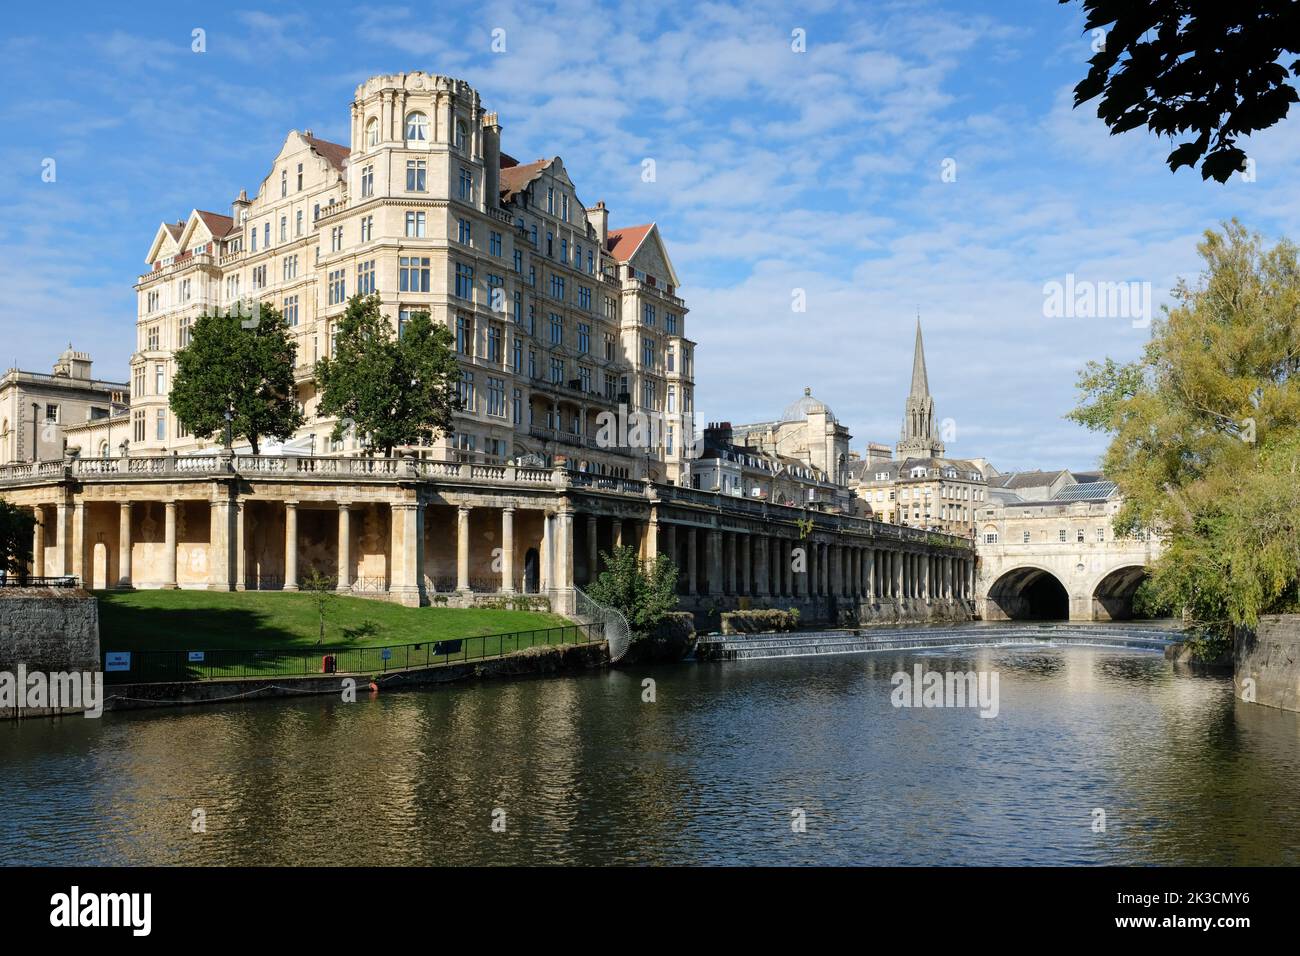 The Empire Hotel and Architect Restaurant in the centre of historic Bath in England. Stock Photo